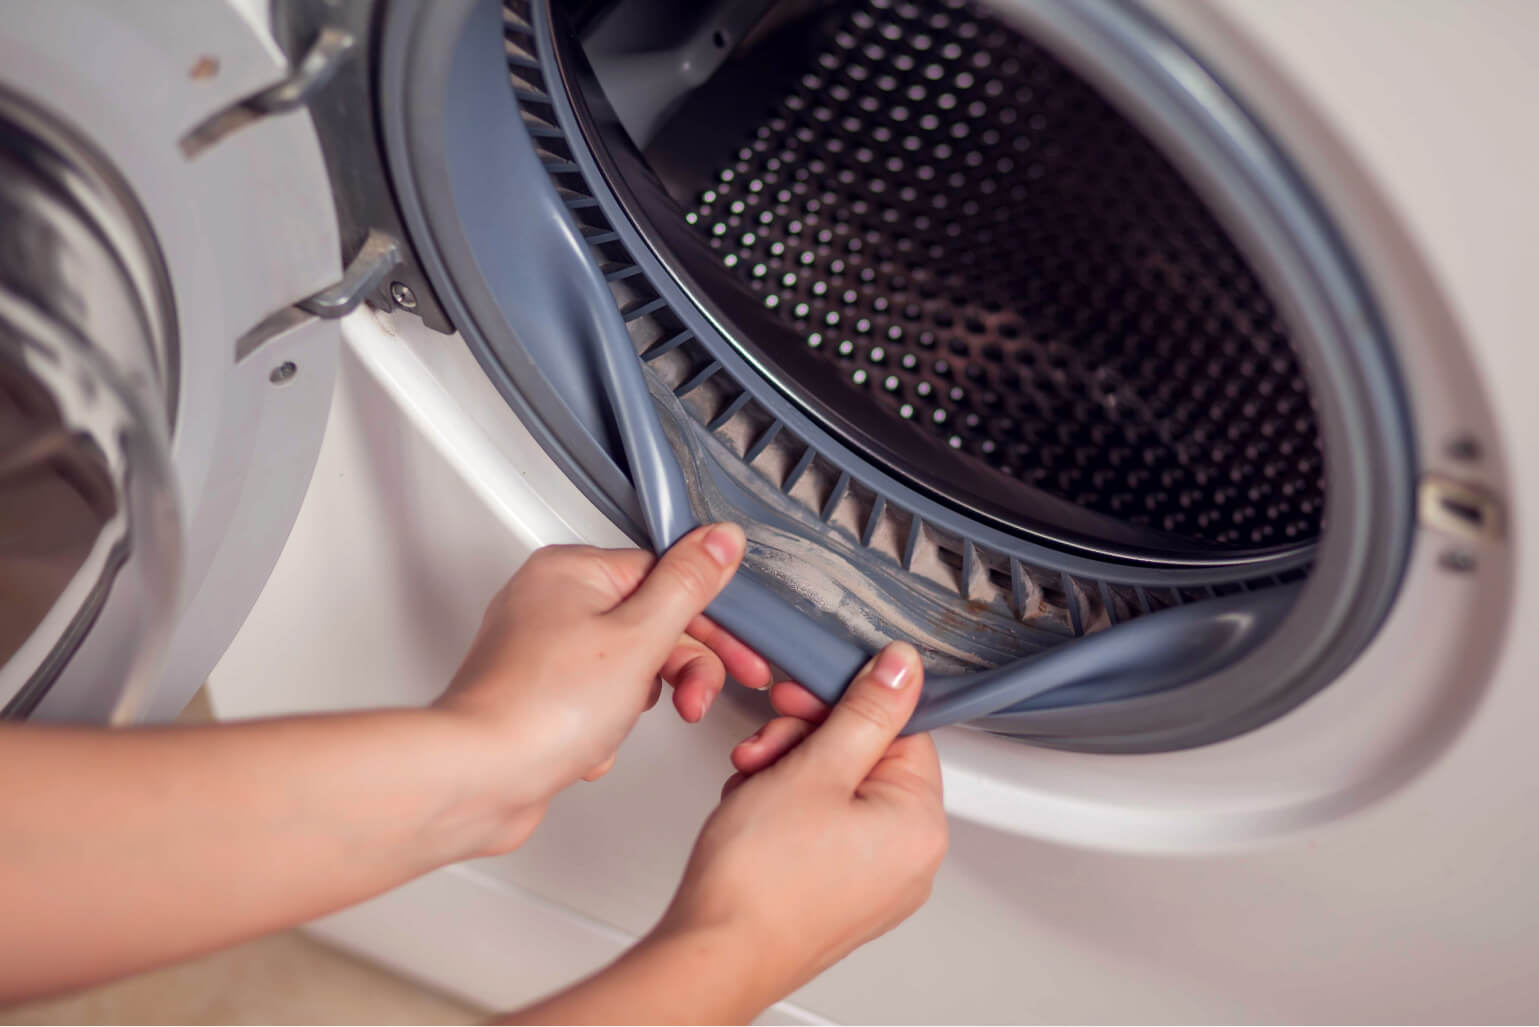 Washing Machine Cleaning Guide: Front Load or Top Load?